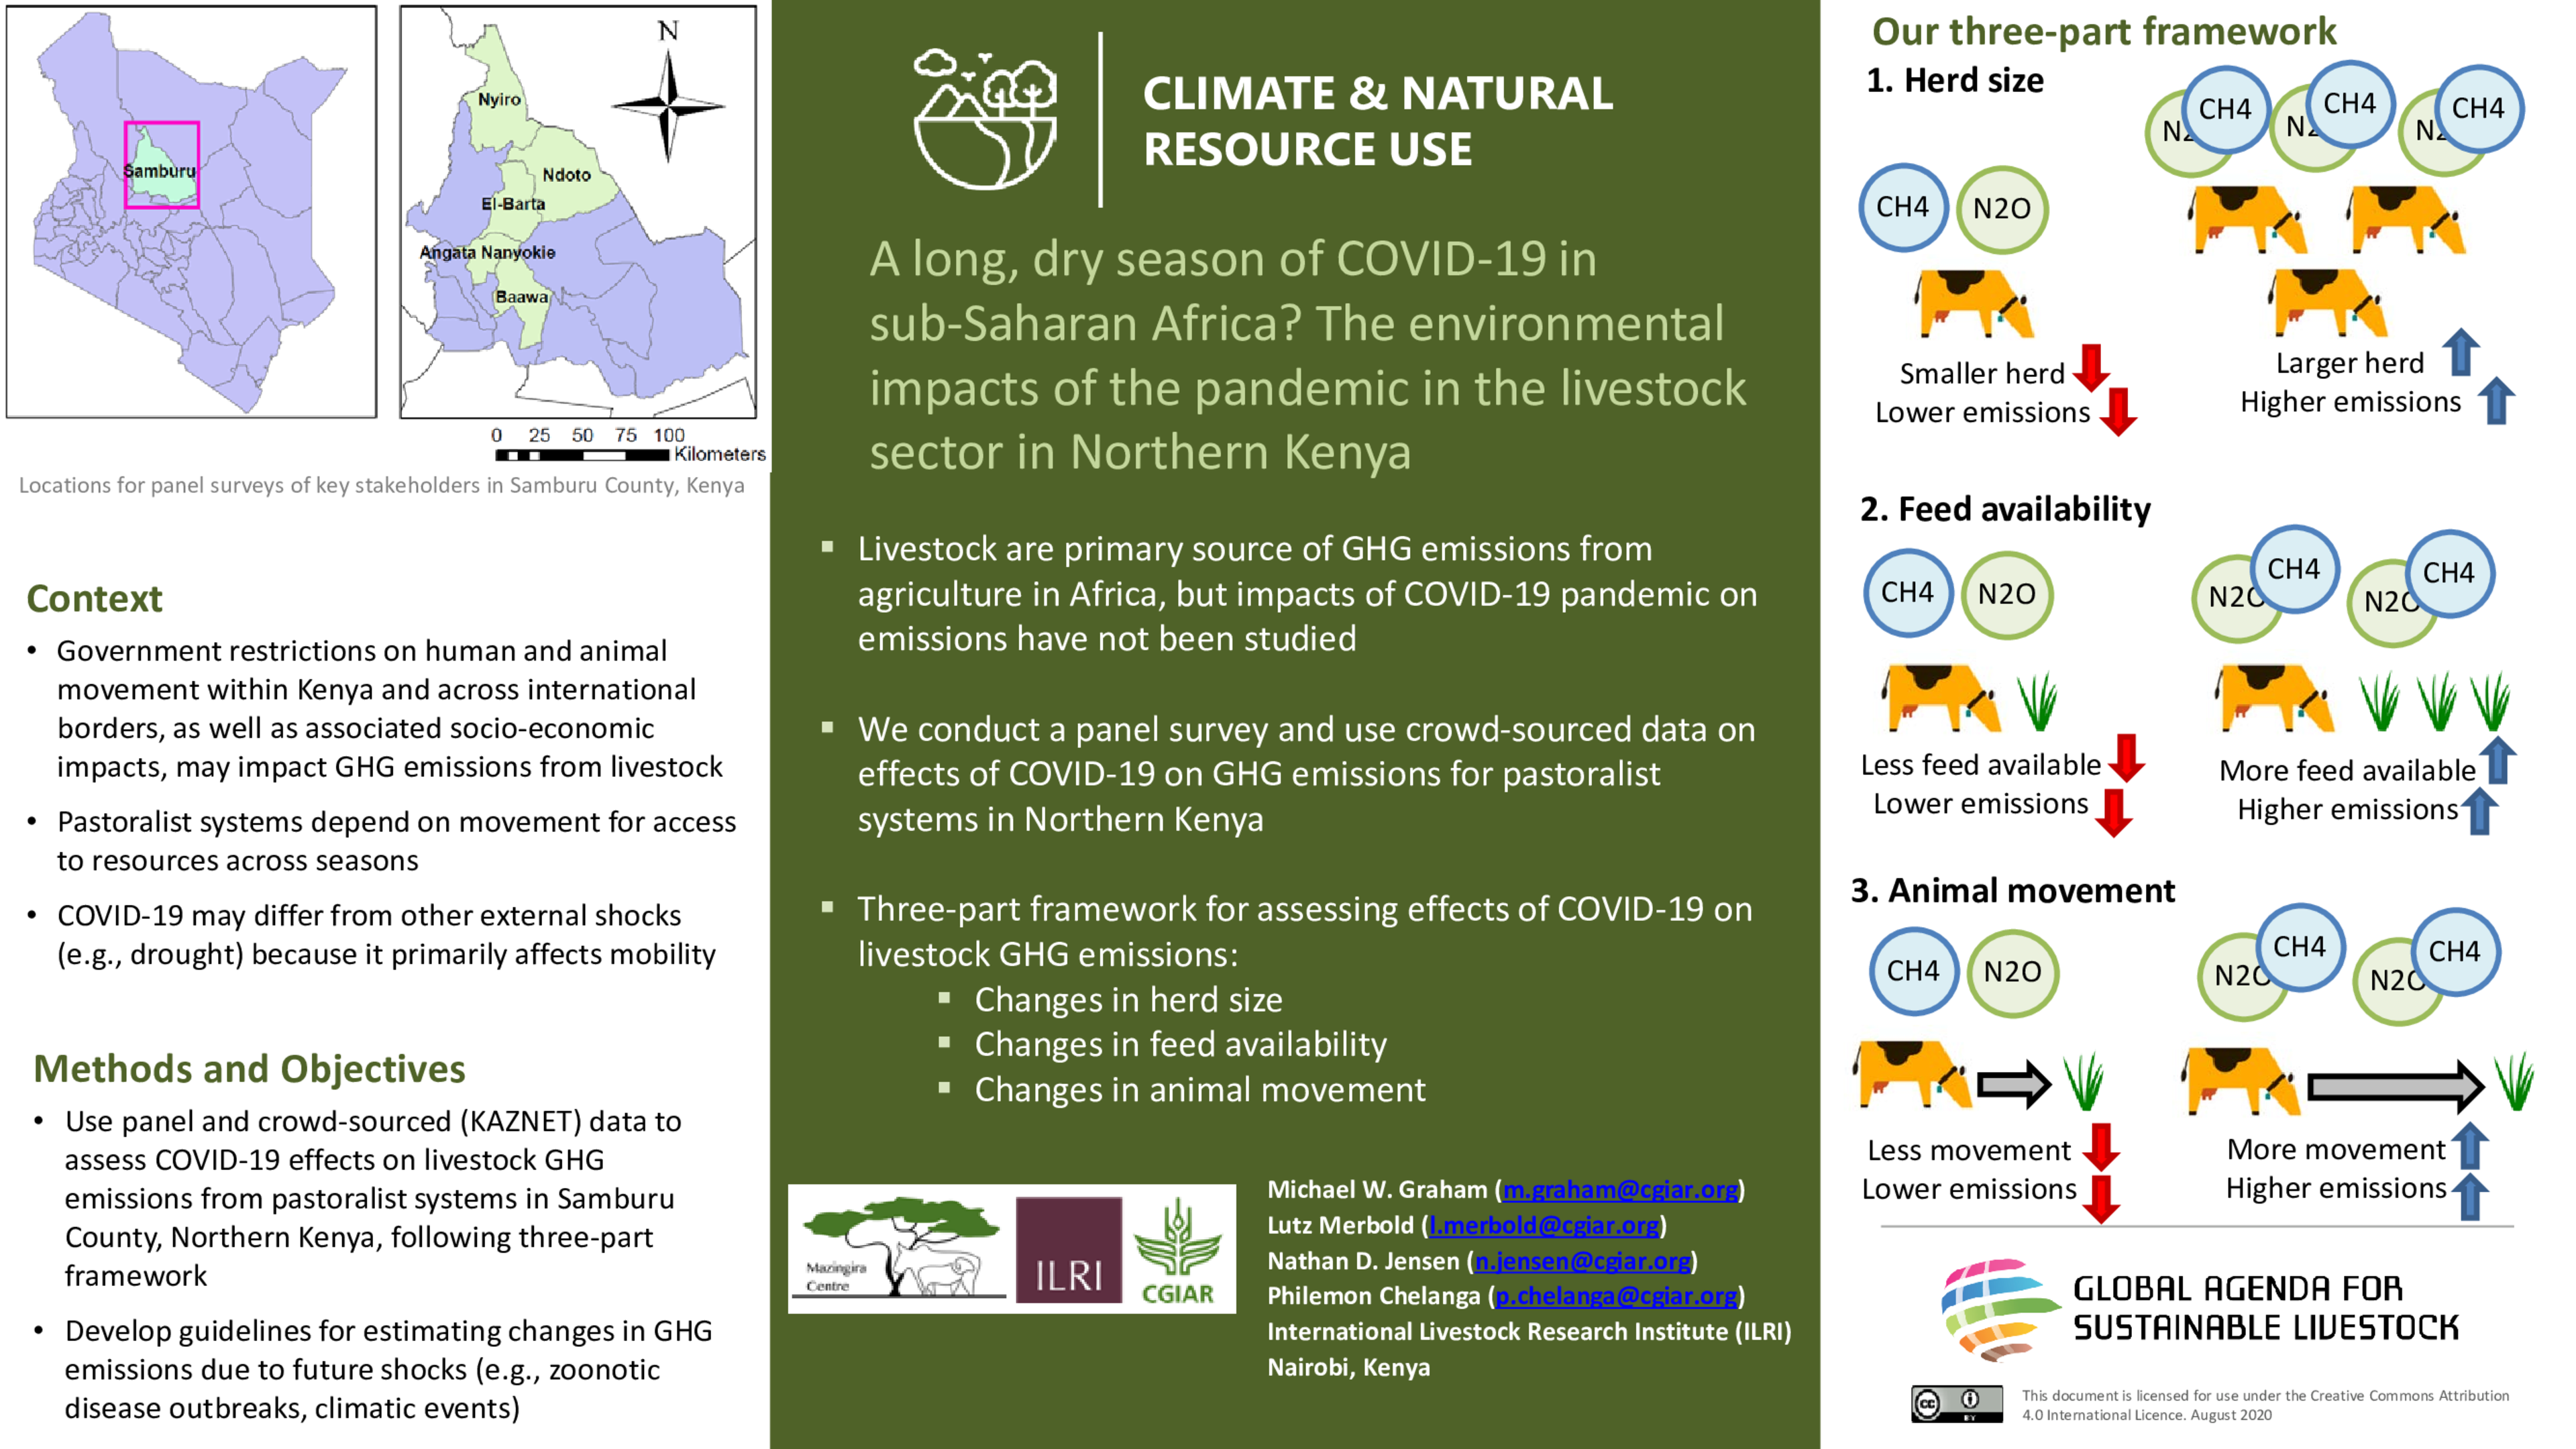 A long, dry season of COVID-19 in sub-Saharan Africa? The environmental impacts of the pandemic in the livestock sector in Northern Kenya